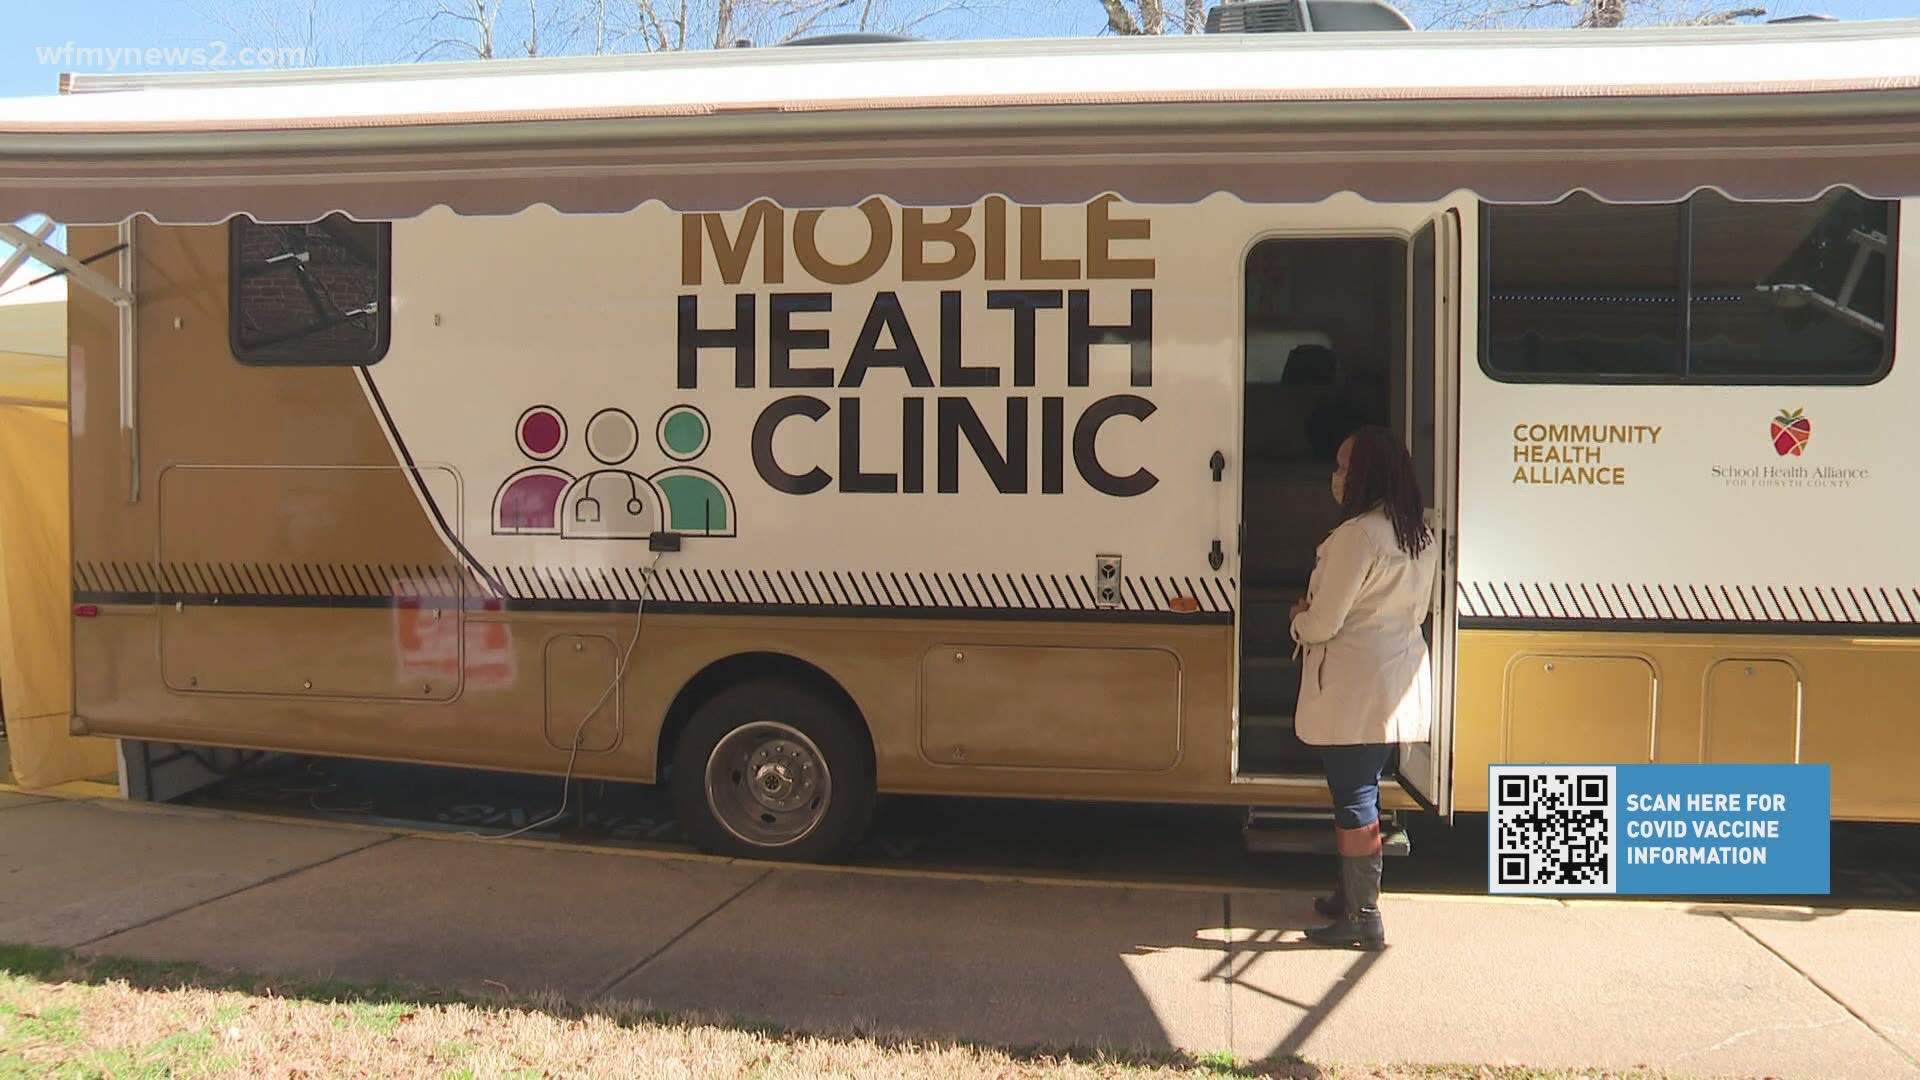 Sixty senior citizens were vaccinated during a mobile clinic in Eastern Winston-Salem.